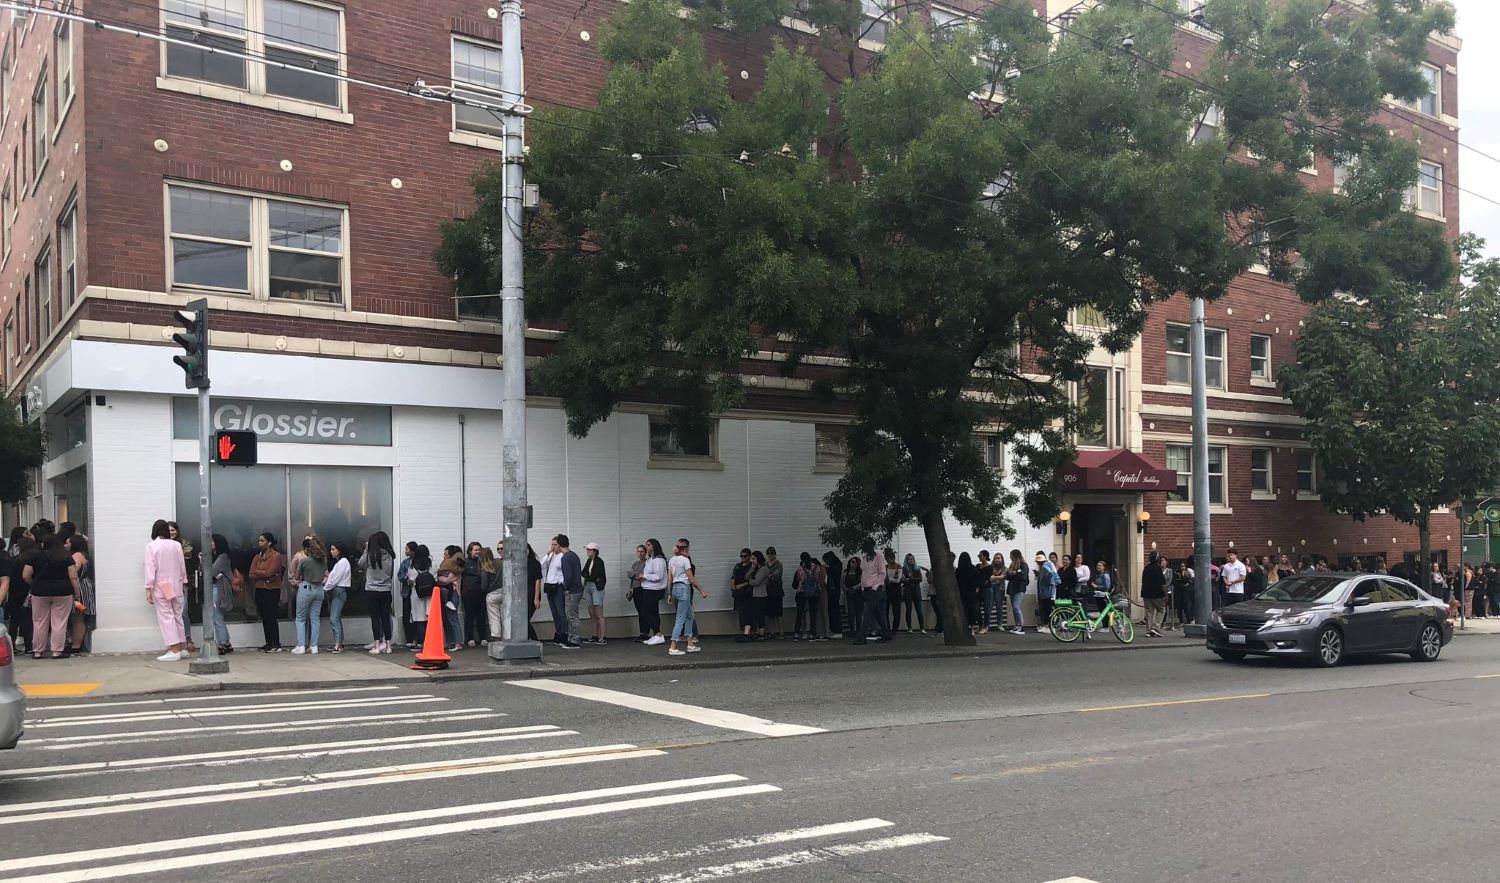 Glossier store with full of people line up